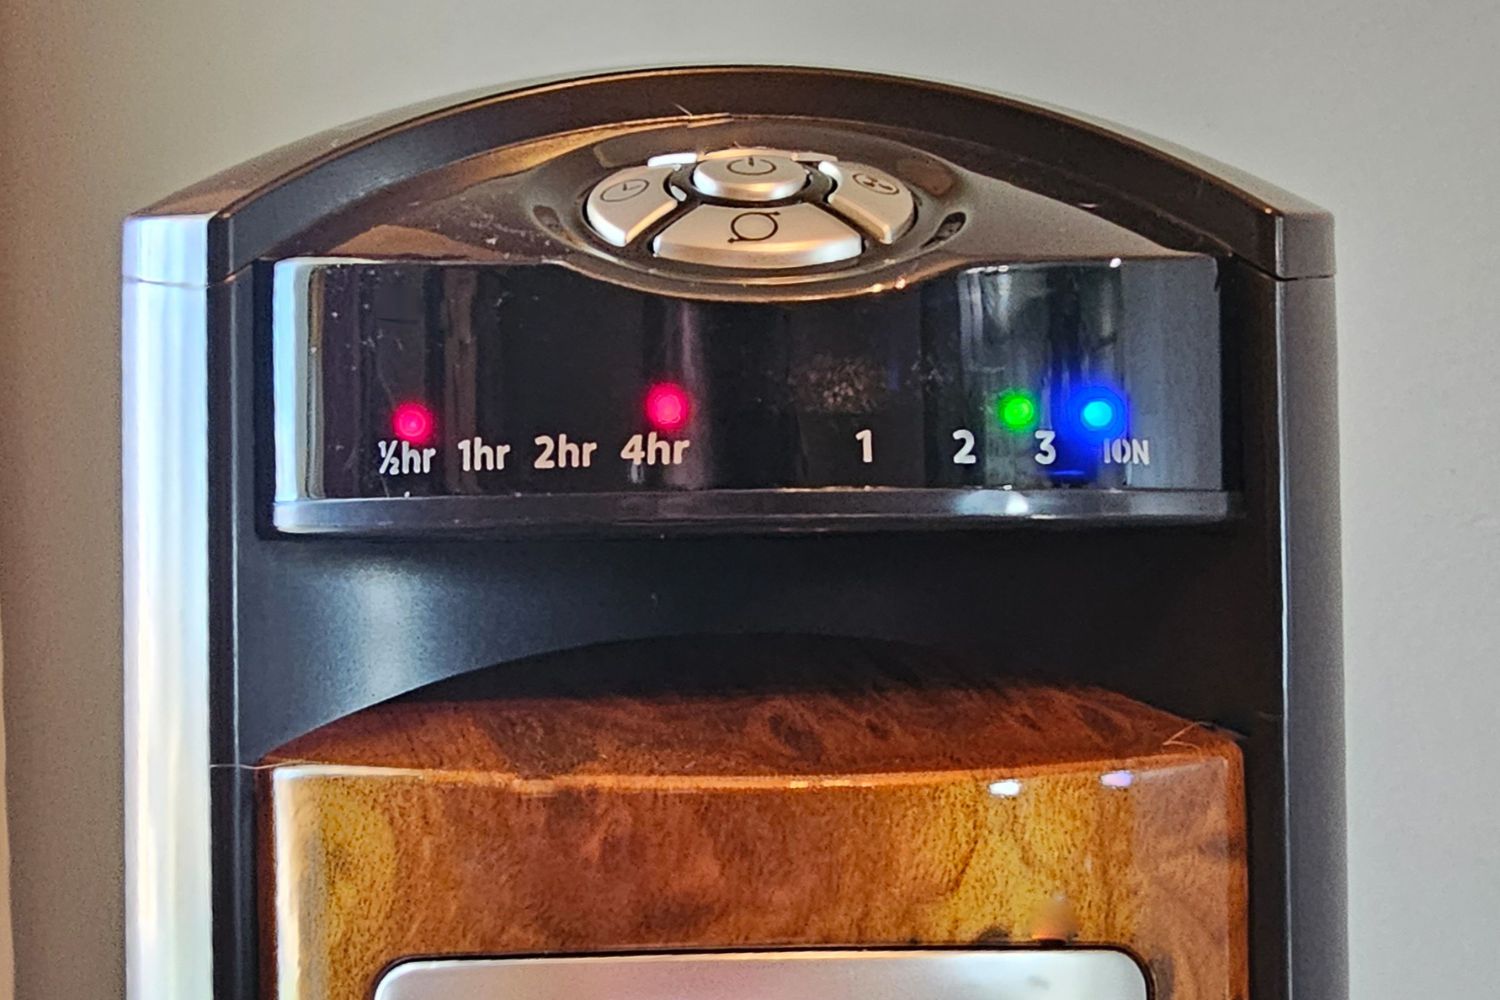 The control panel on the Lasko Wind Curve tower fan showing its speed setting and timer.